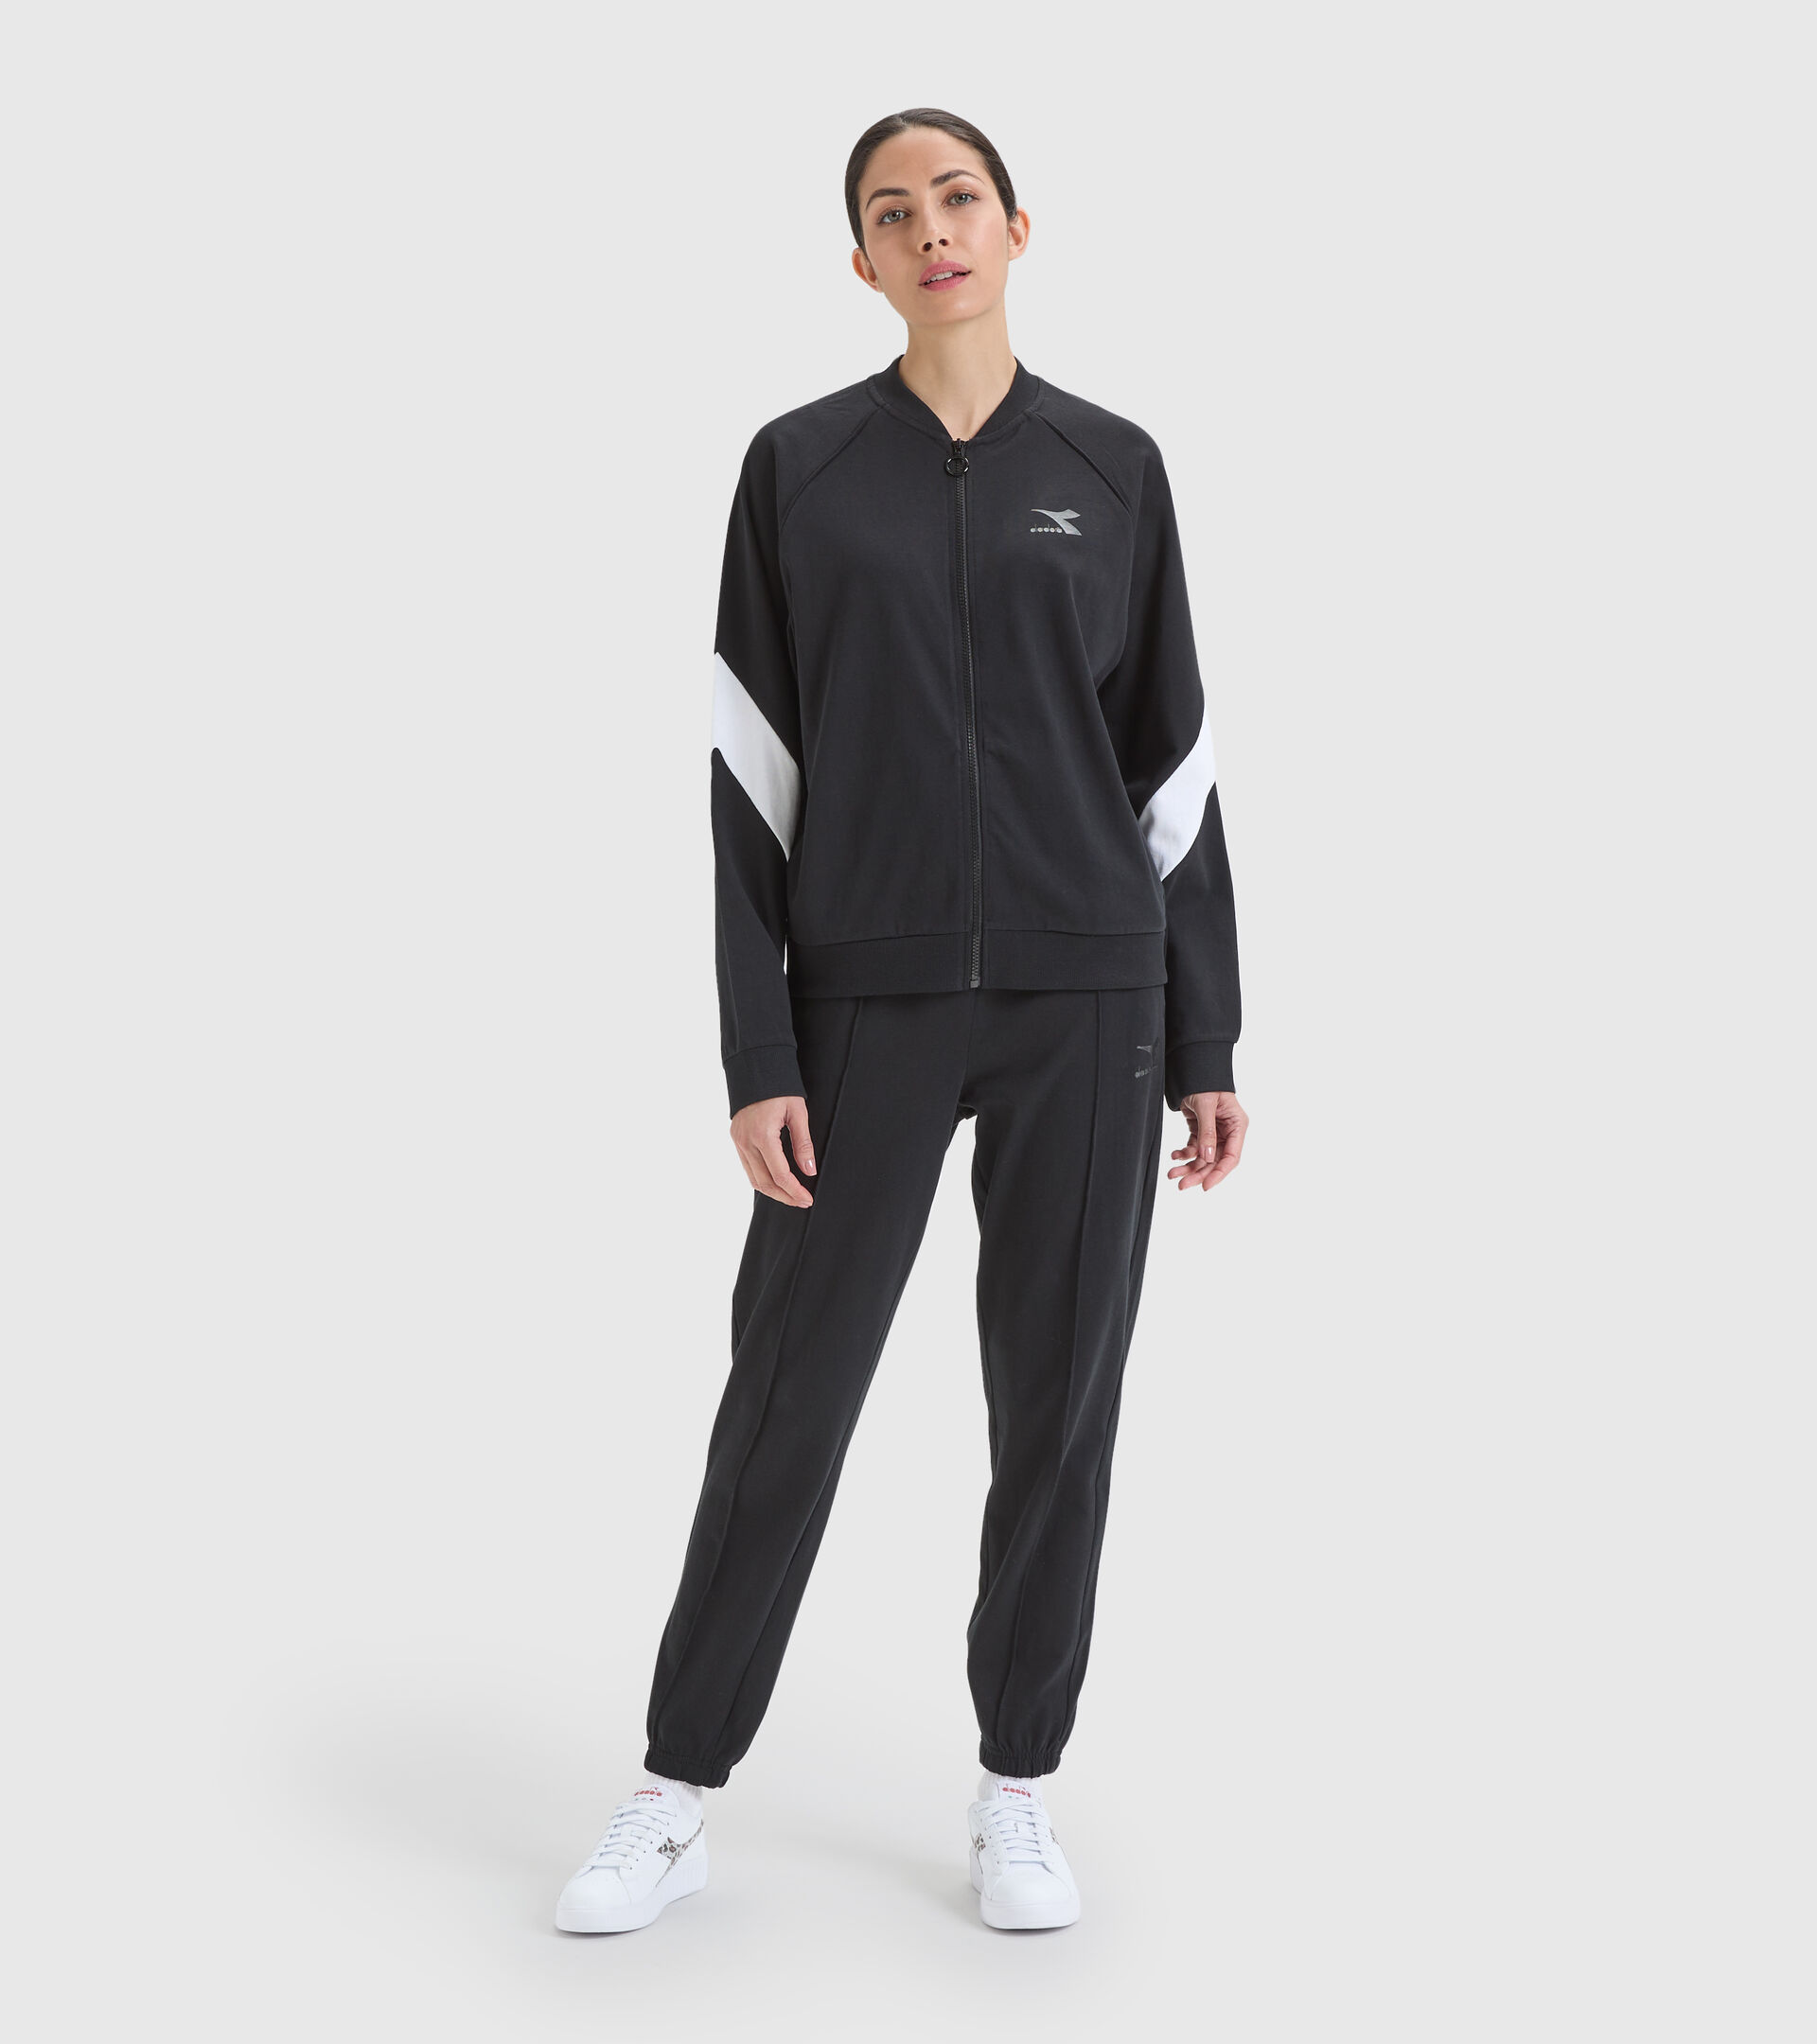 Evolove Regular Fit Cotton Track Suit for Women